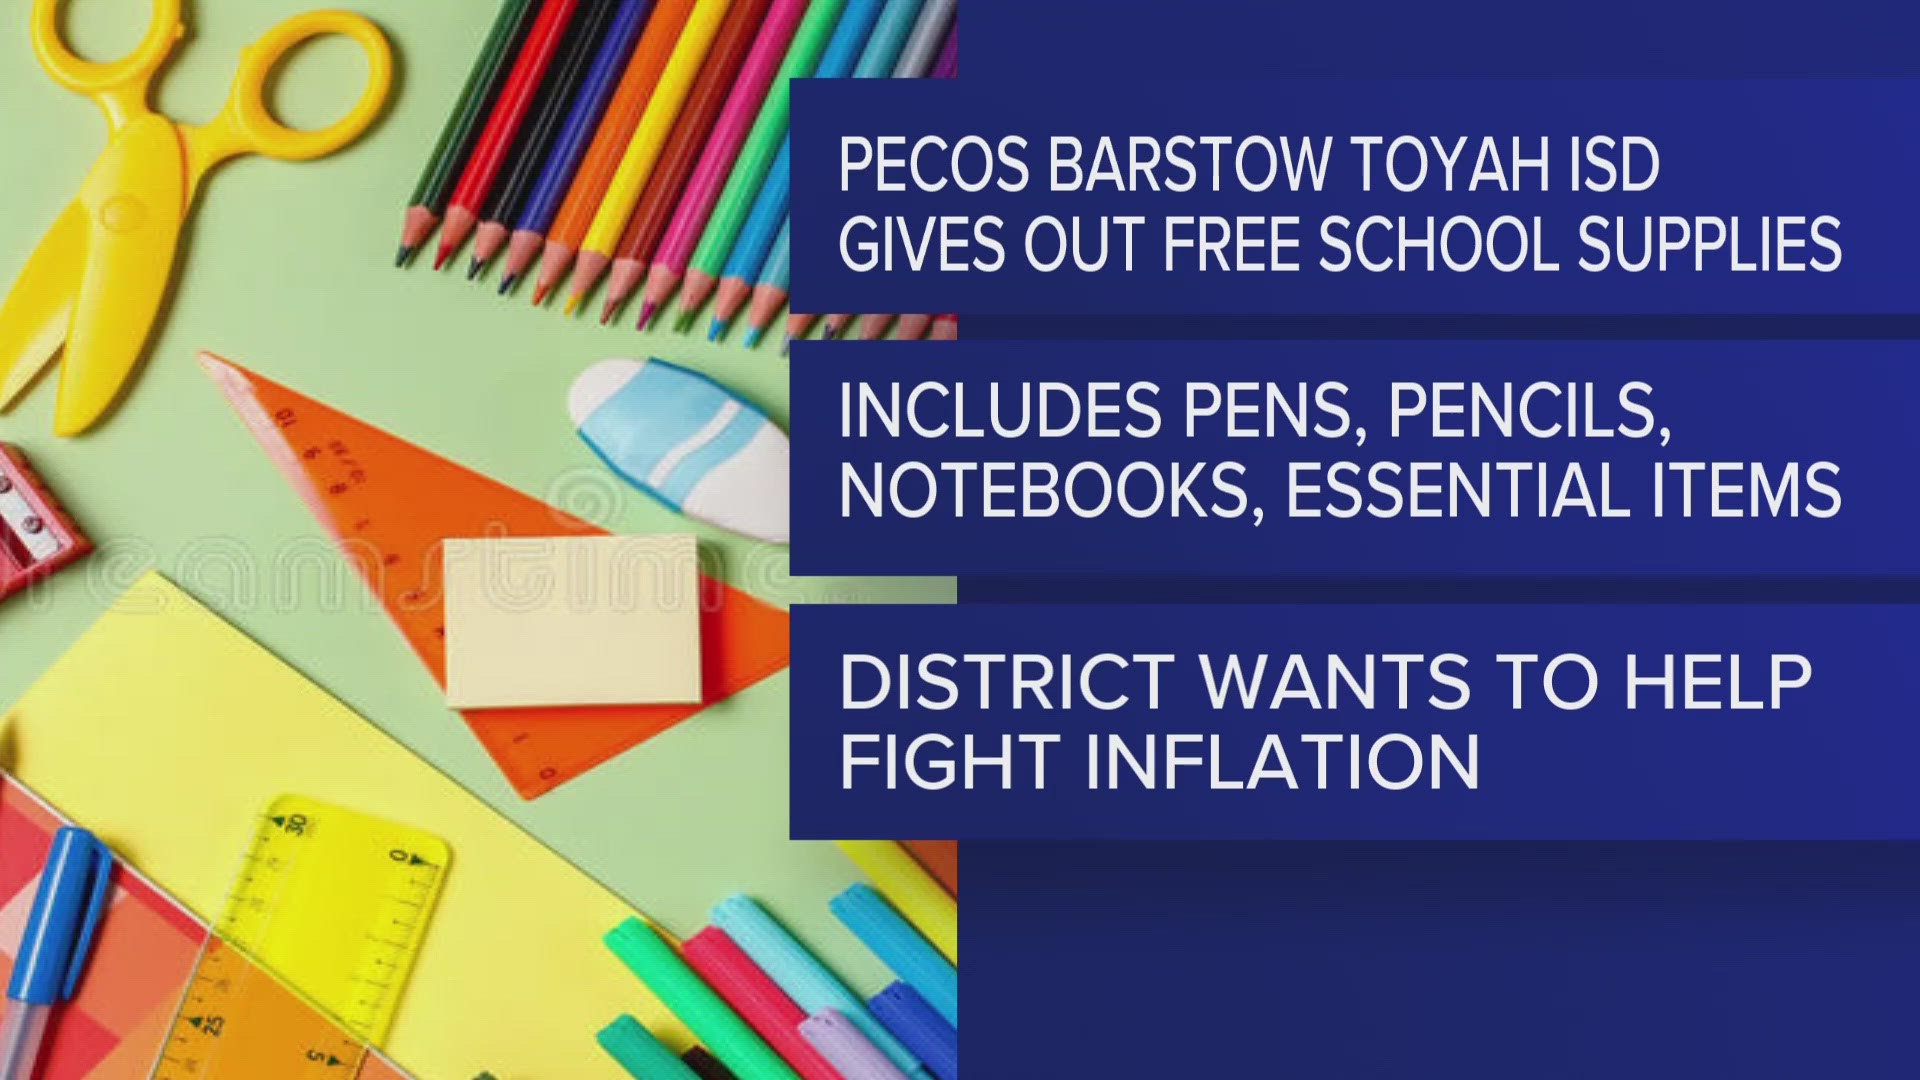 On July 24th the PBTISD Board of Trustees approved “to invest in the success of every student” by giving out free school supplies for the upcoming school year.